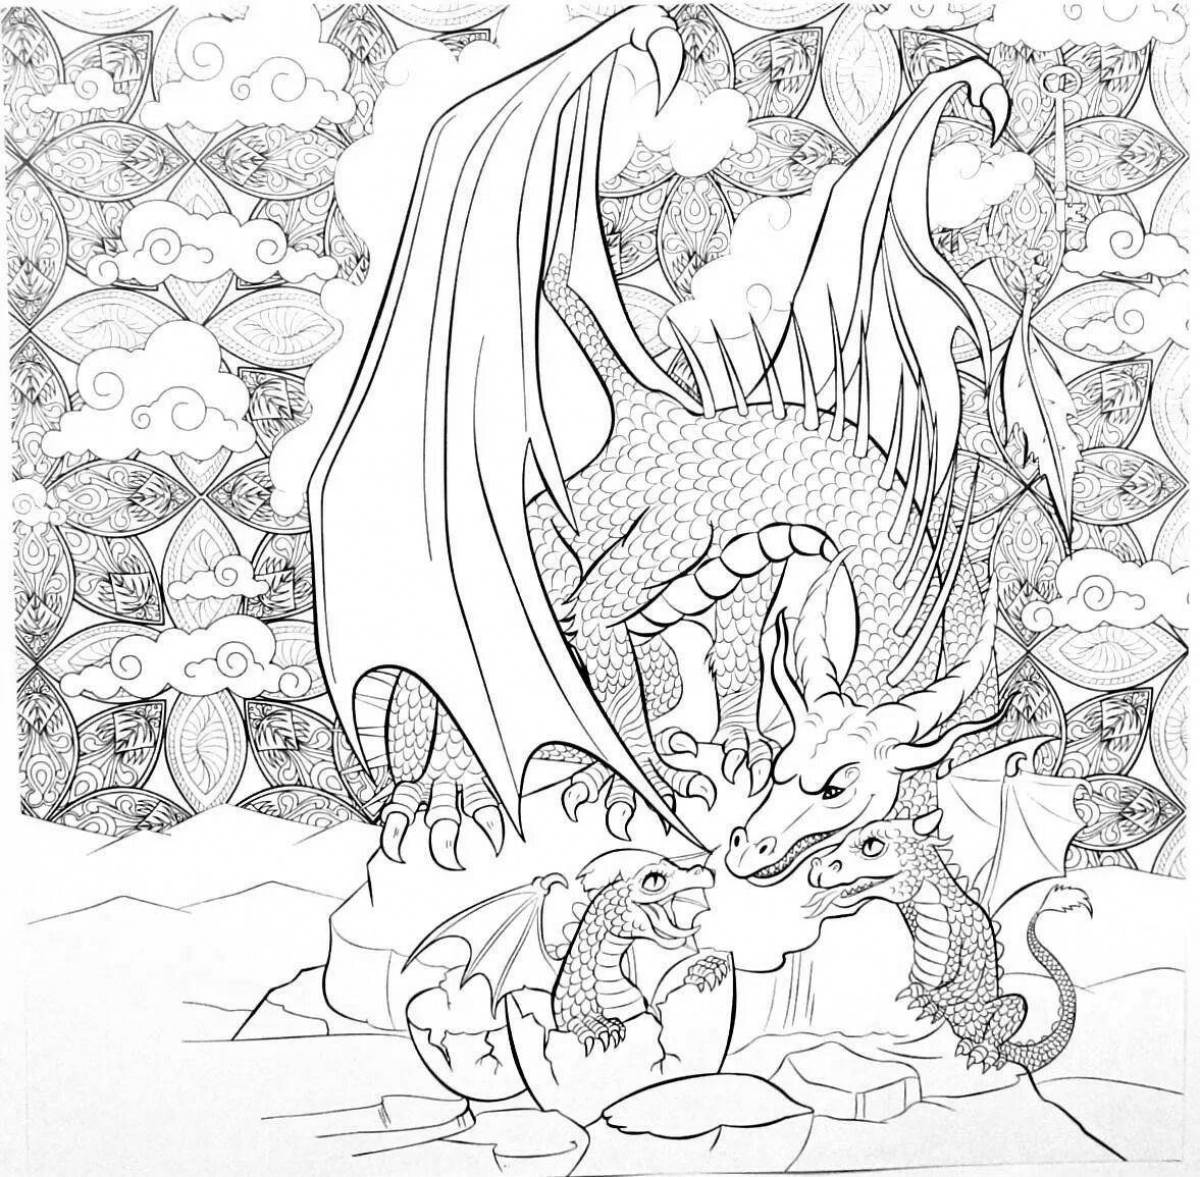 Charming water dragon coloring page